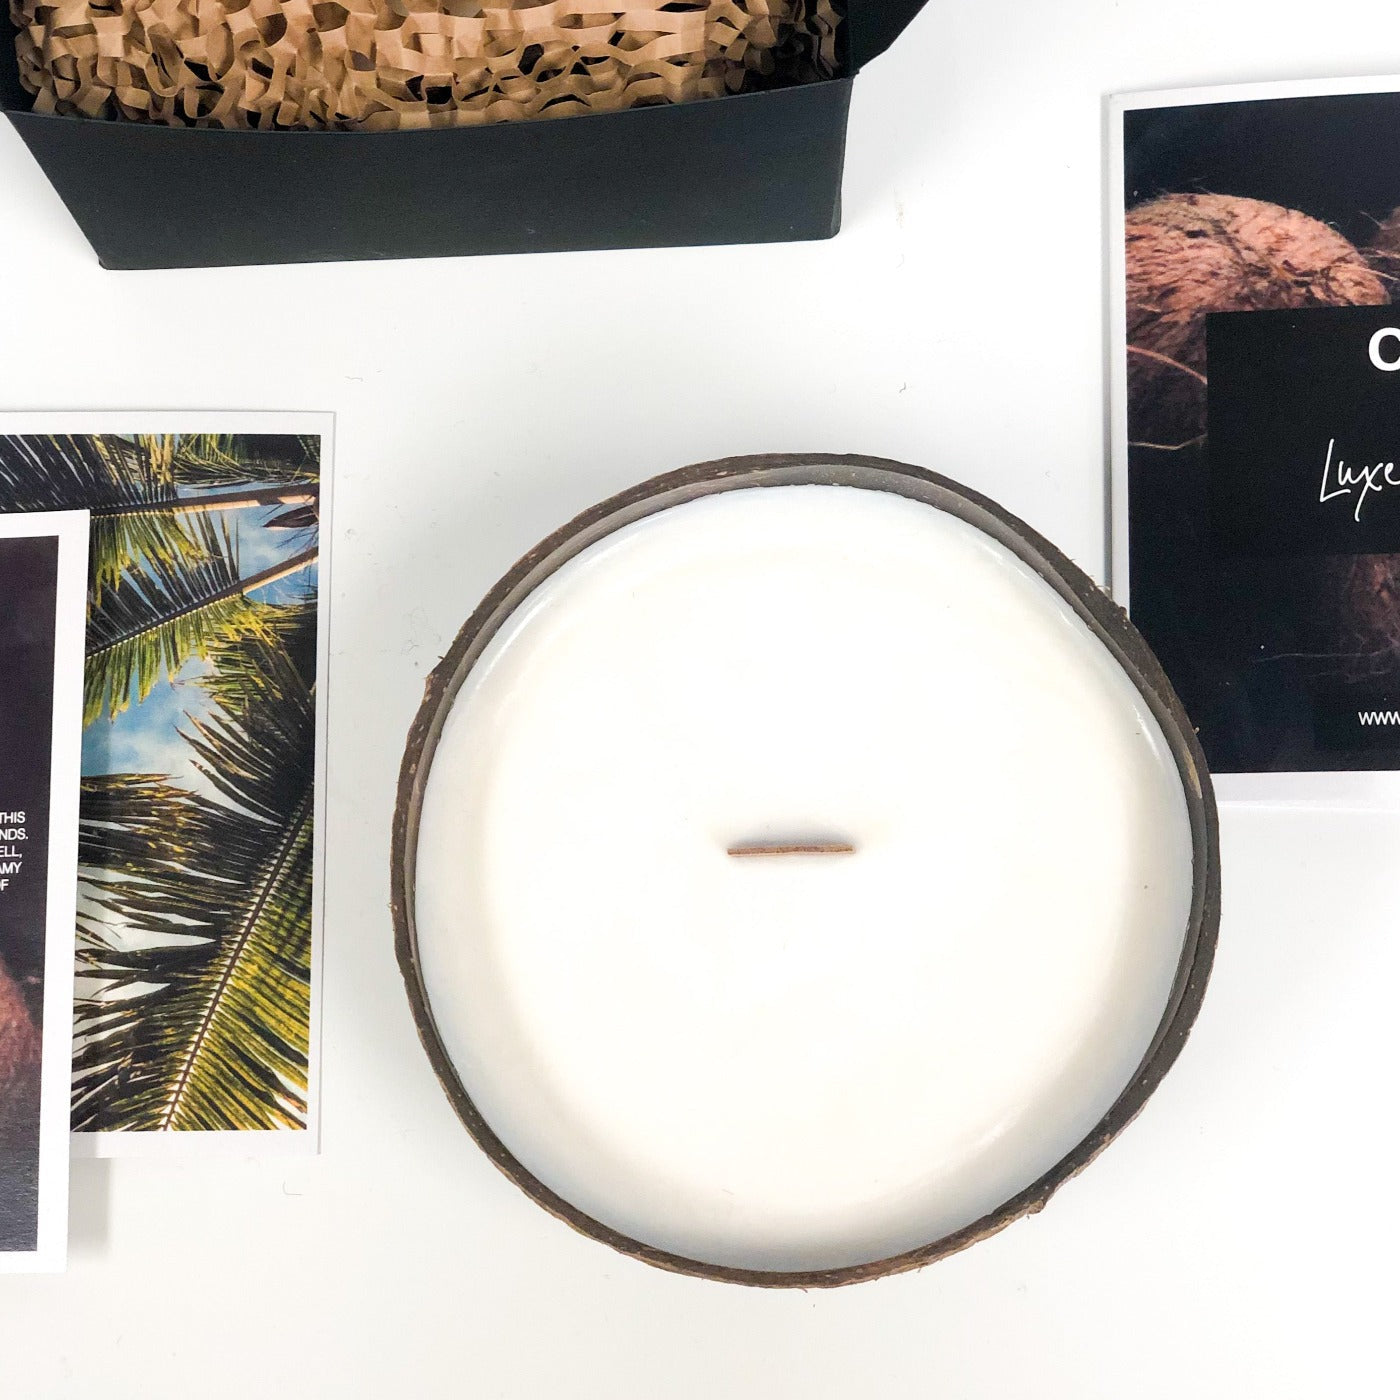 Coconut bowl candles by The Luxe Candle Co